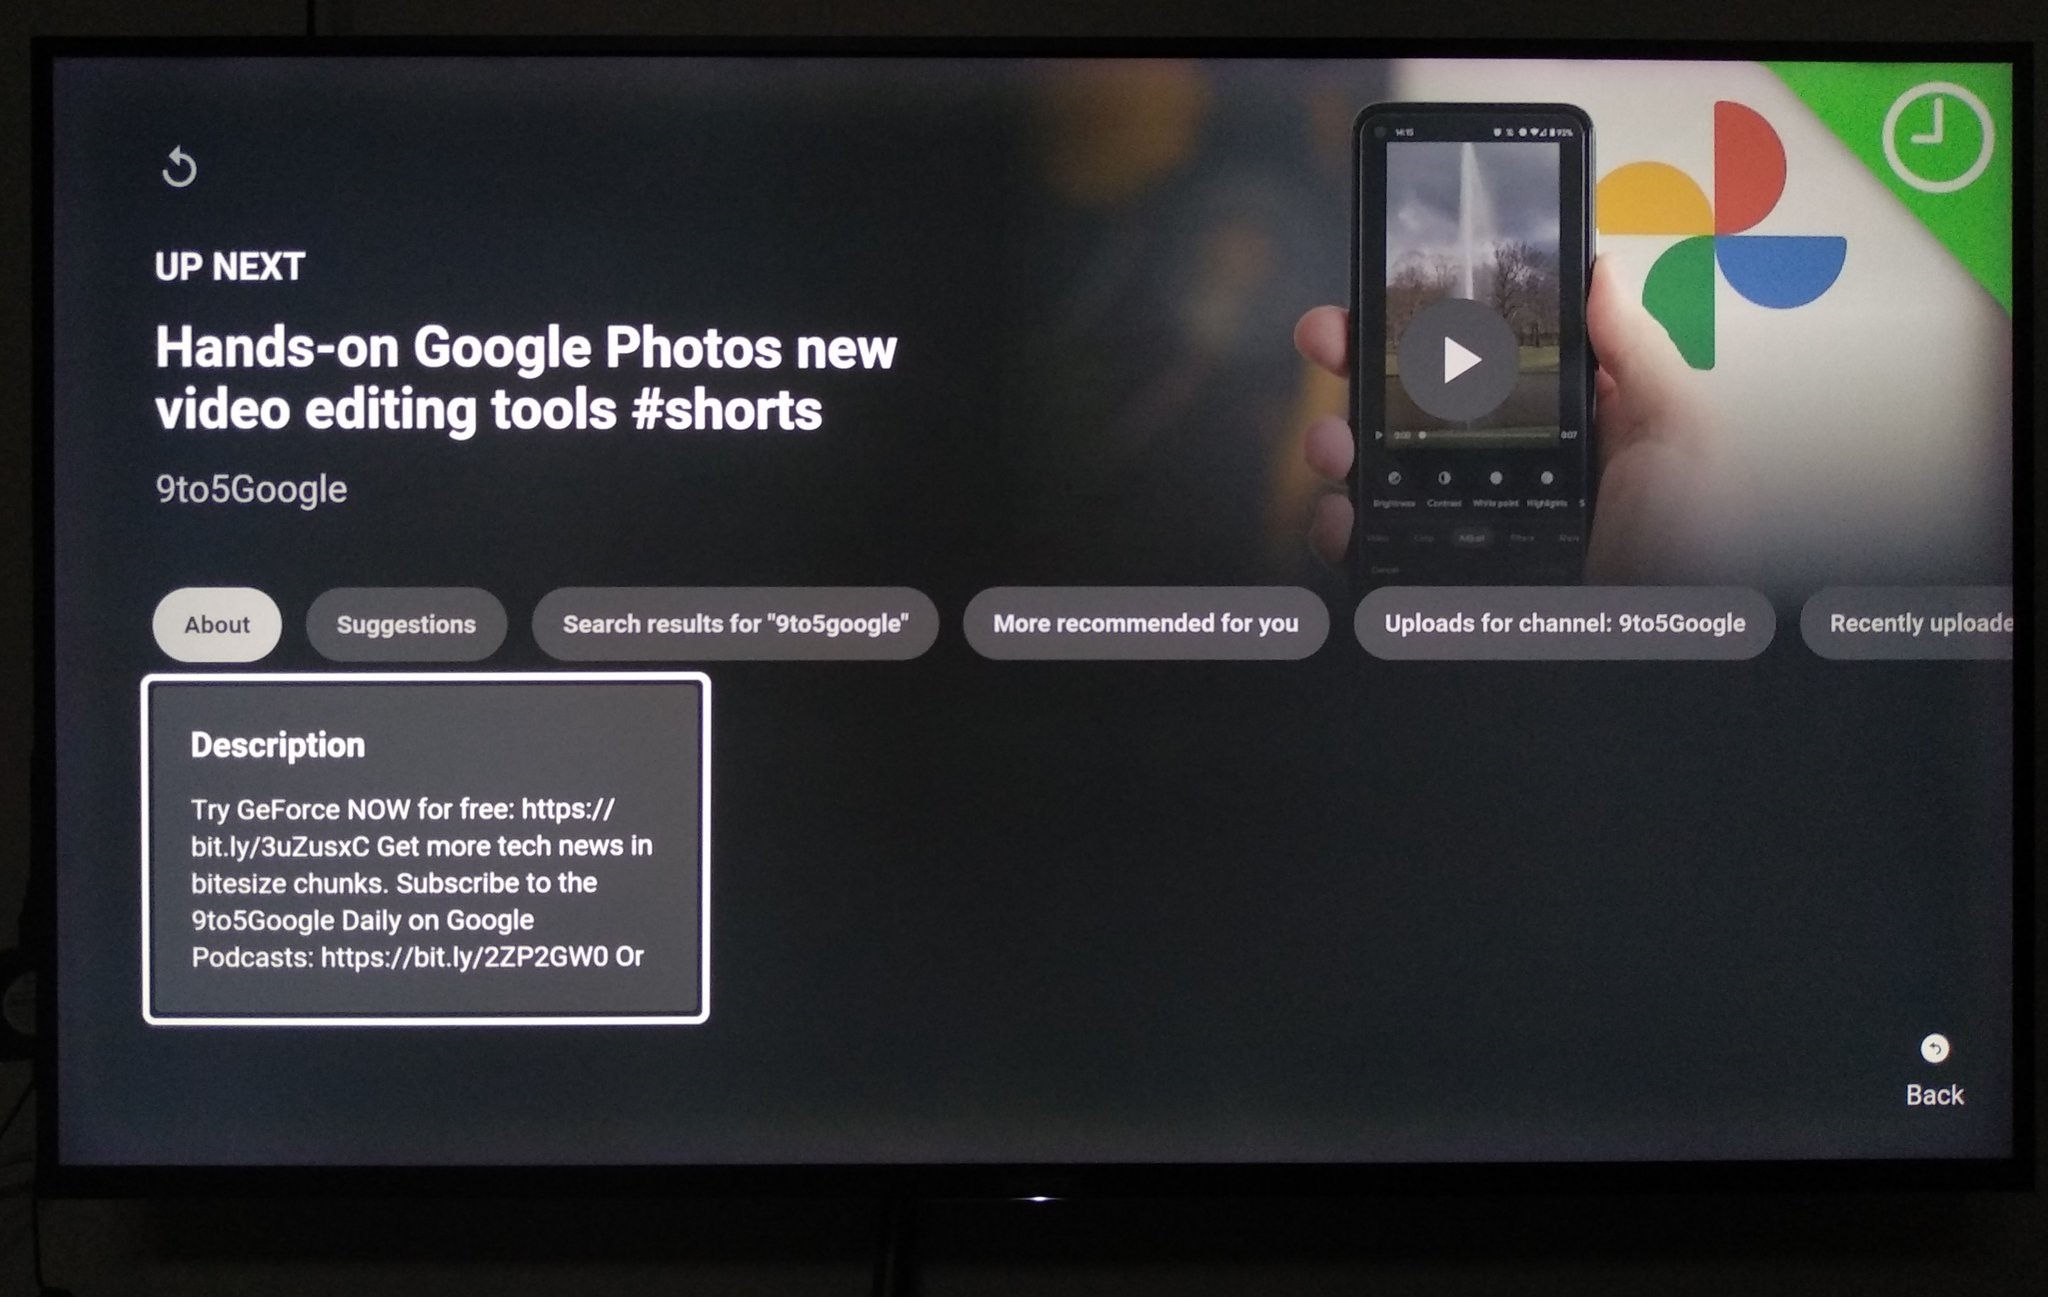 youtube - Youtube For Android Tv Platform May Soon Get Video Description, Additional New Features - Telugu Tech World